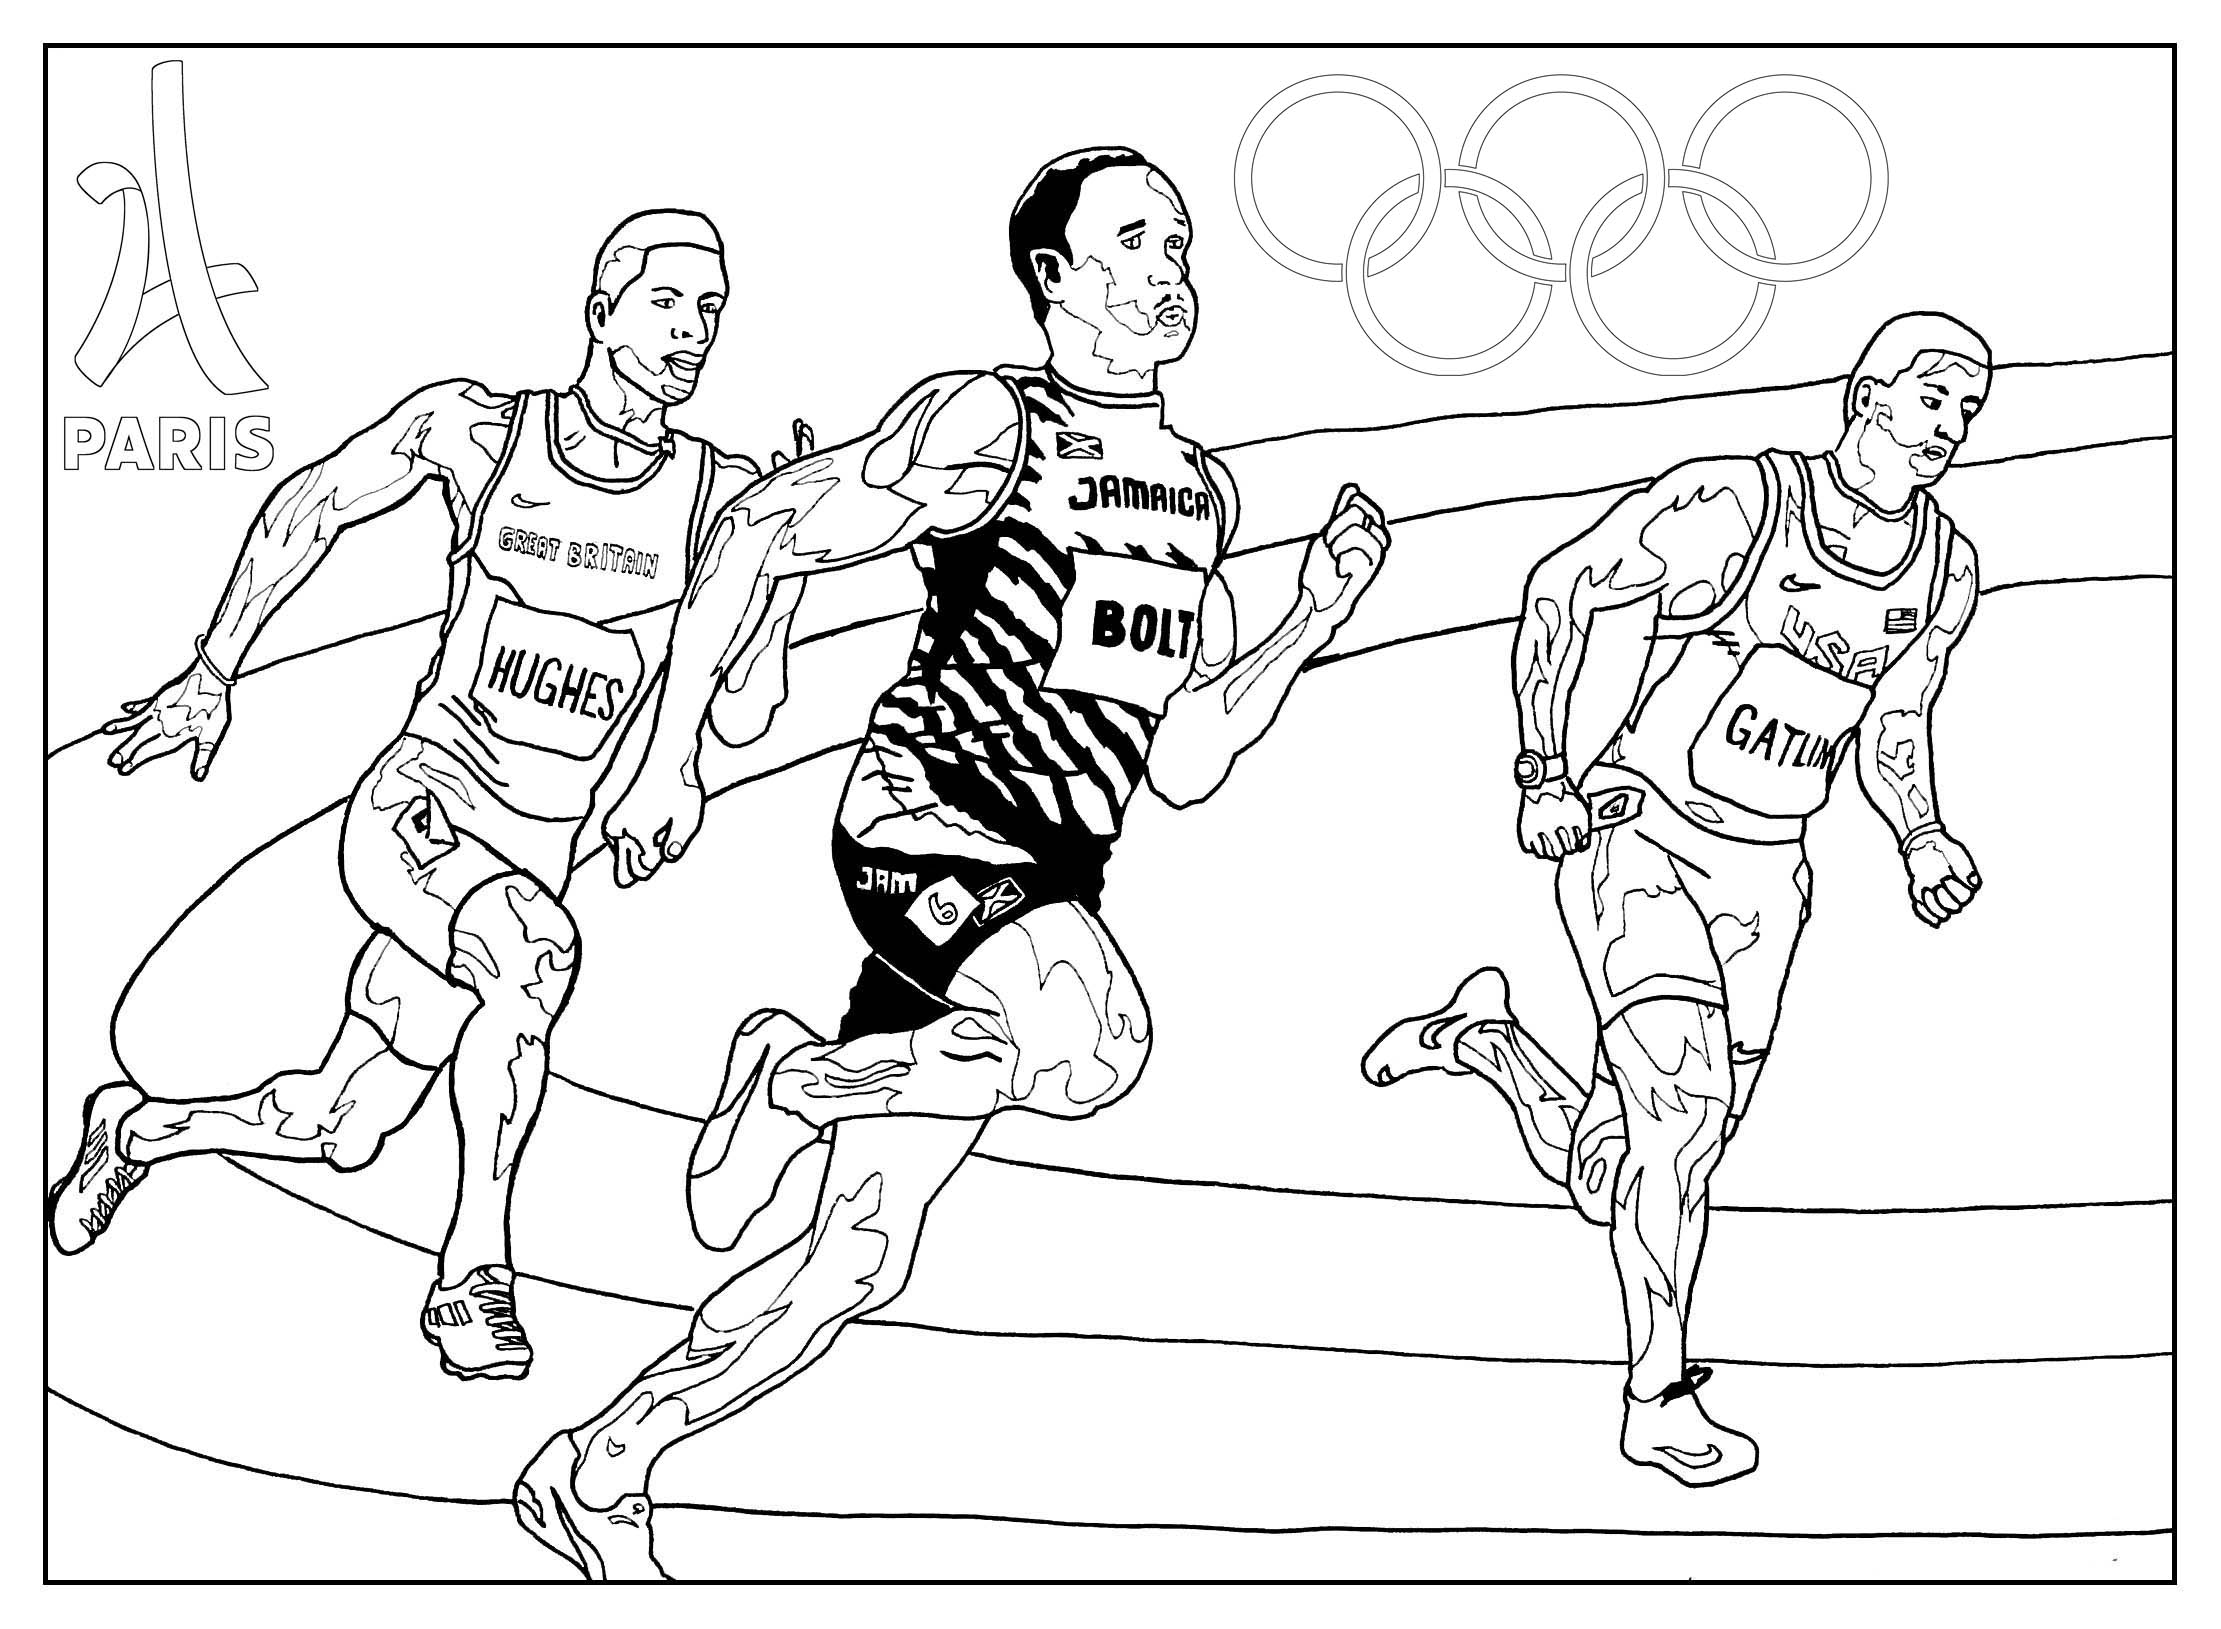 Games athletics paris 2024 - Olympic (and sport) Adult Coloring Pages